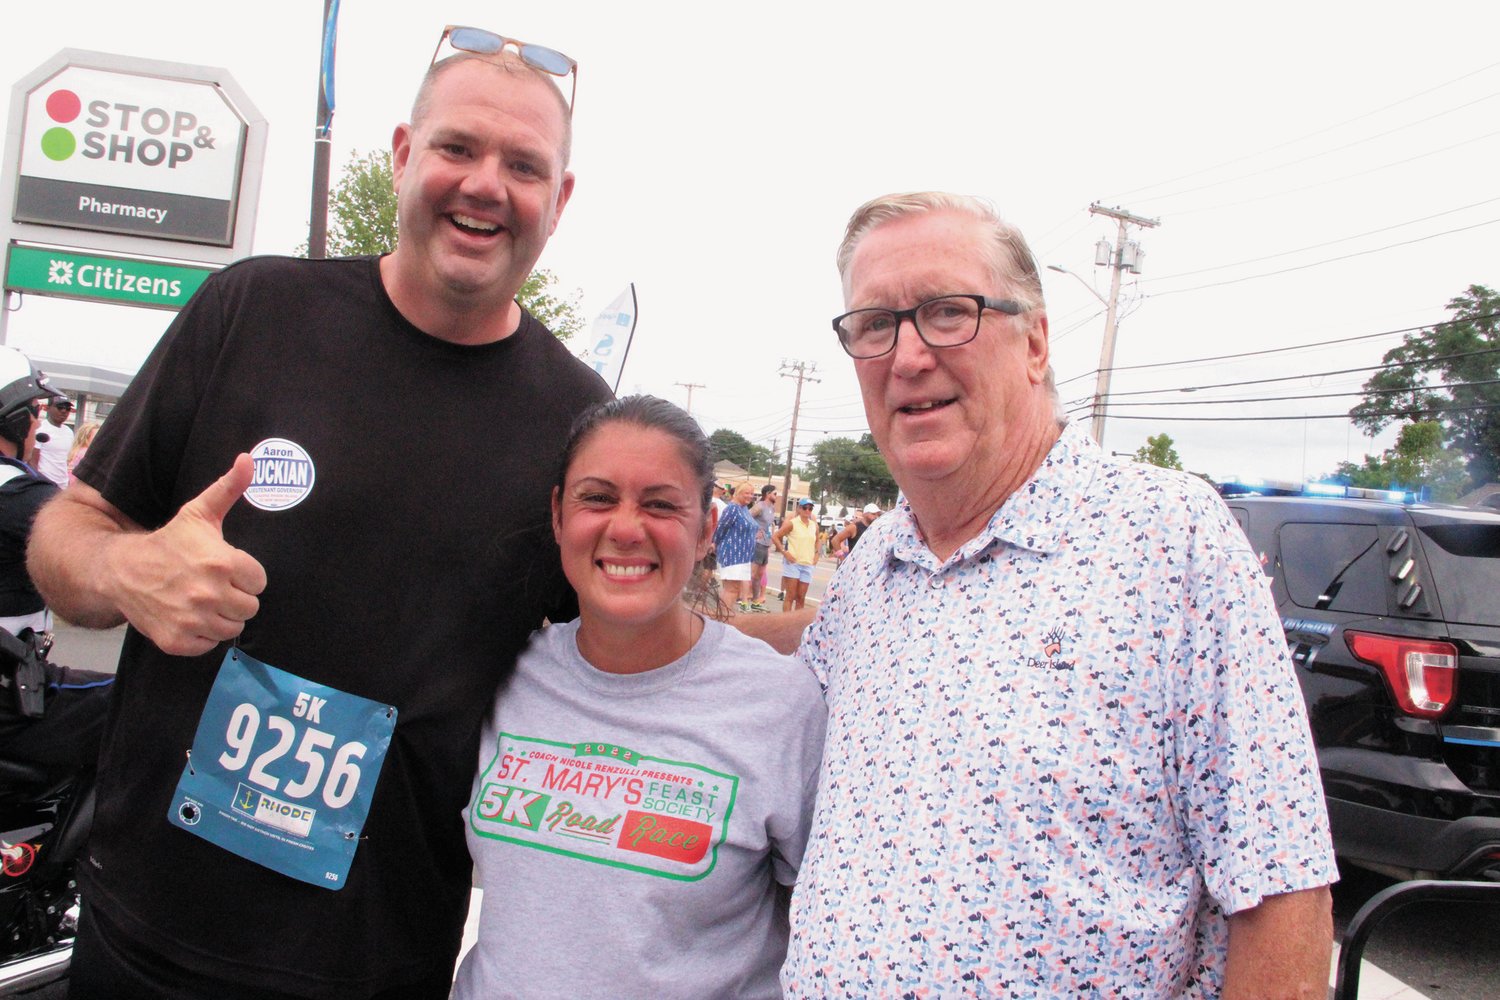 IN MORE THAN ONE RACE: Aaron Guckian, Republican candidate for Lieutant Governor couldn’t be missed in the field of 5K runners – he stands nearly seven feet tall. Here he is joined by Councilwoman Nicole Renzulli and Mayor Hopkins.